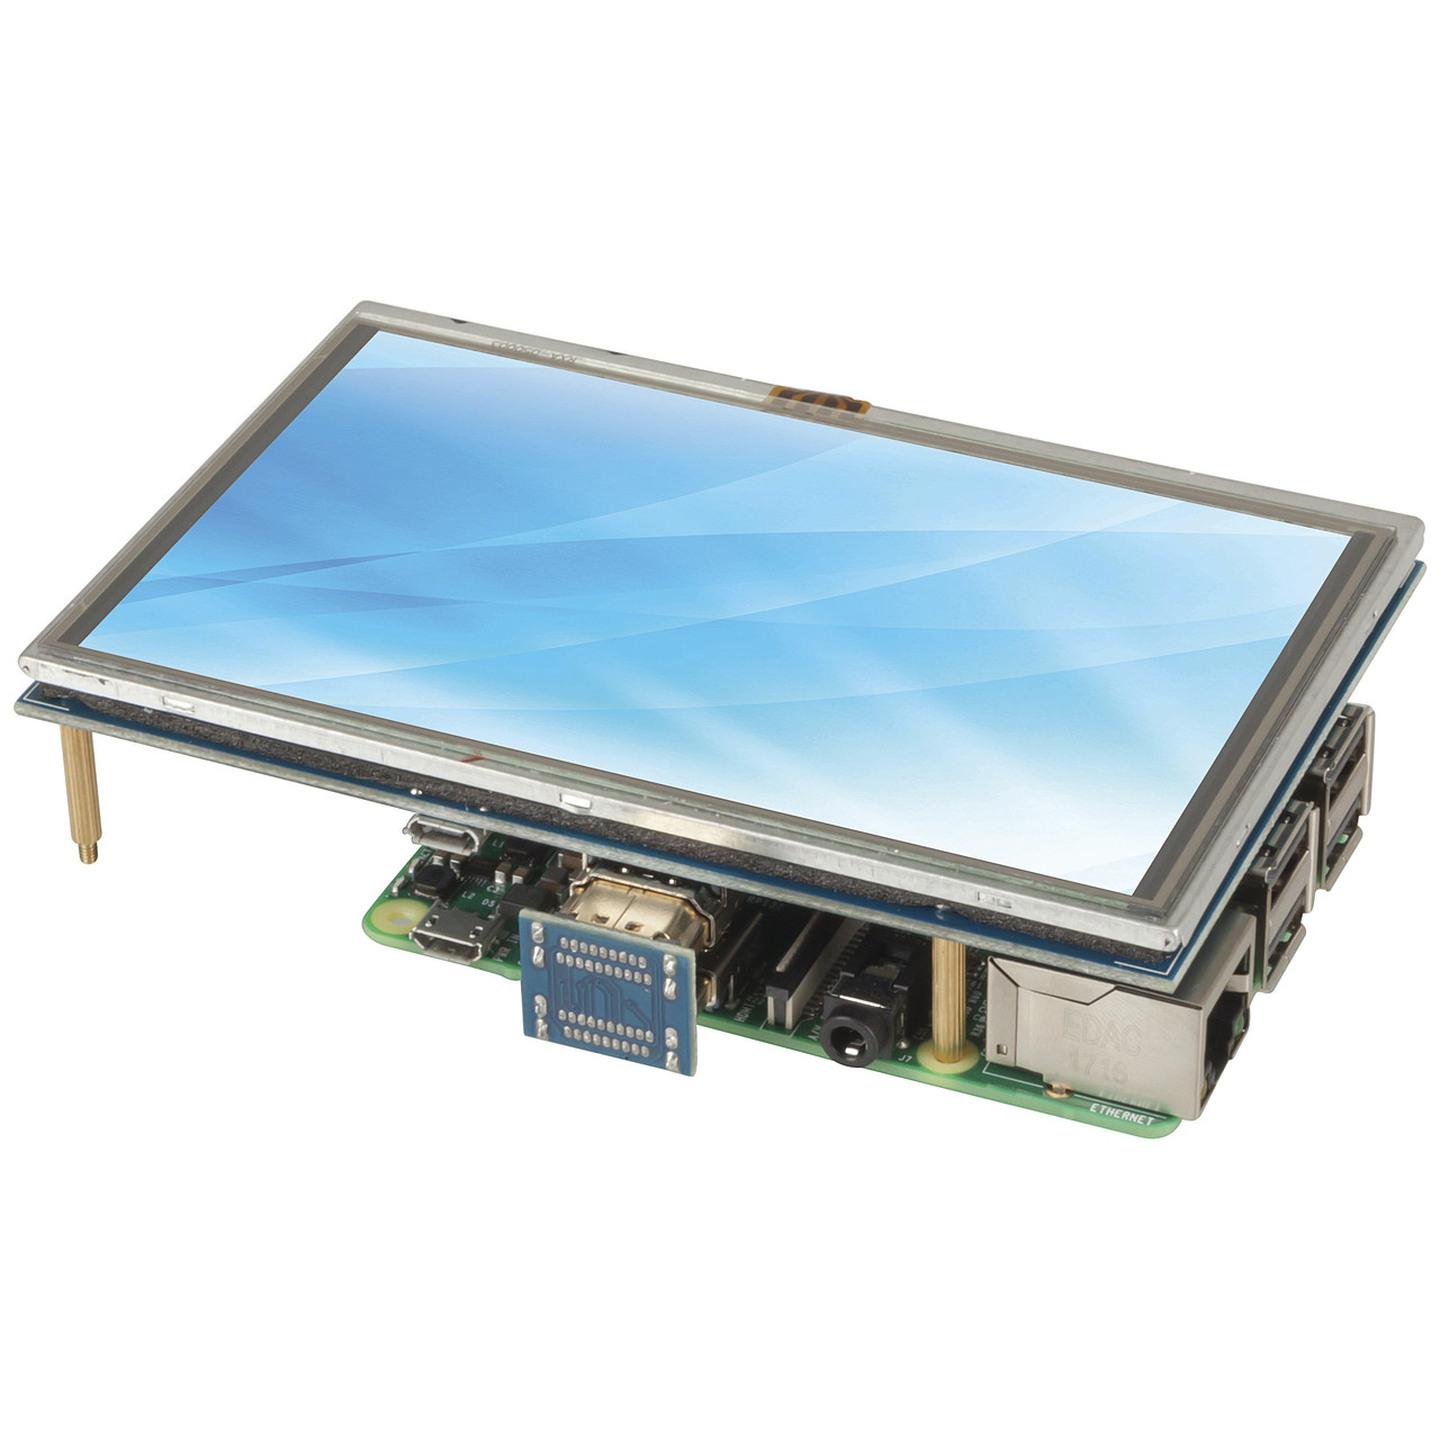 5 Inch Touchscreen with HDMI and USB